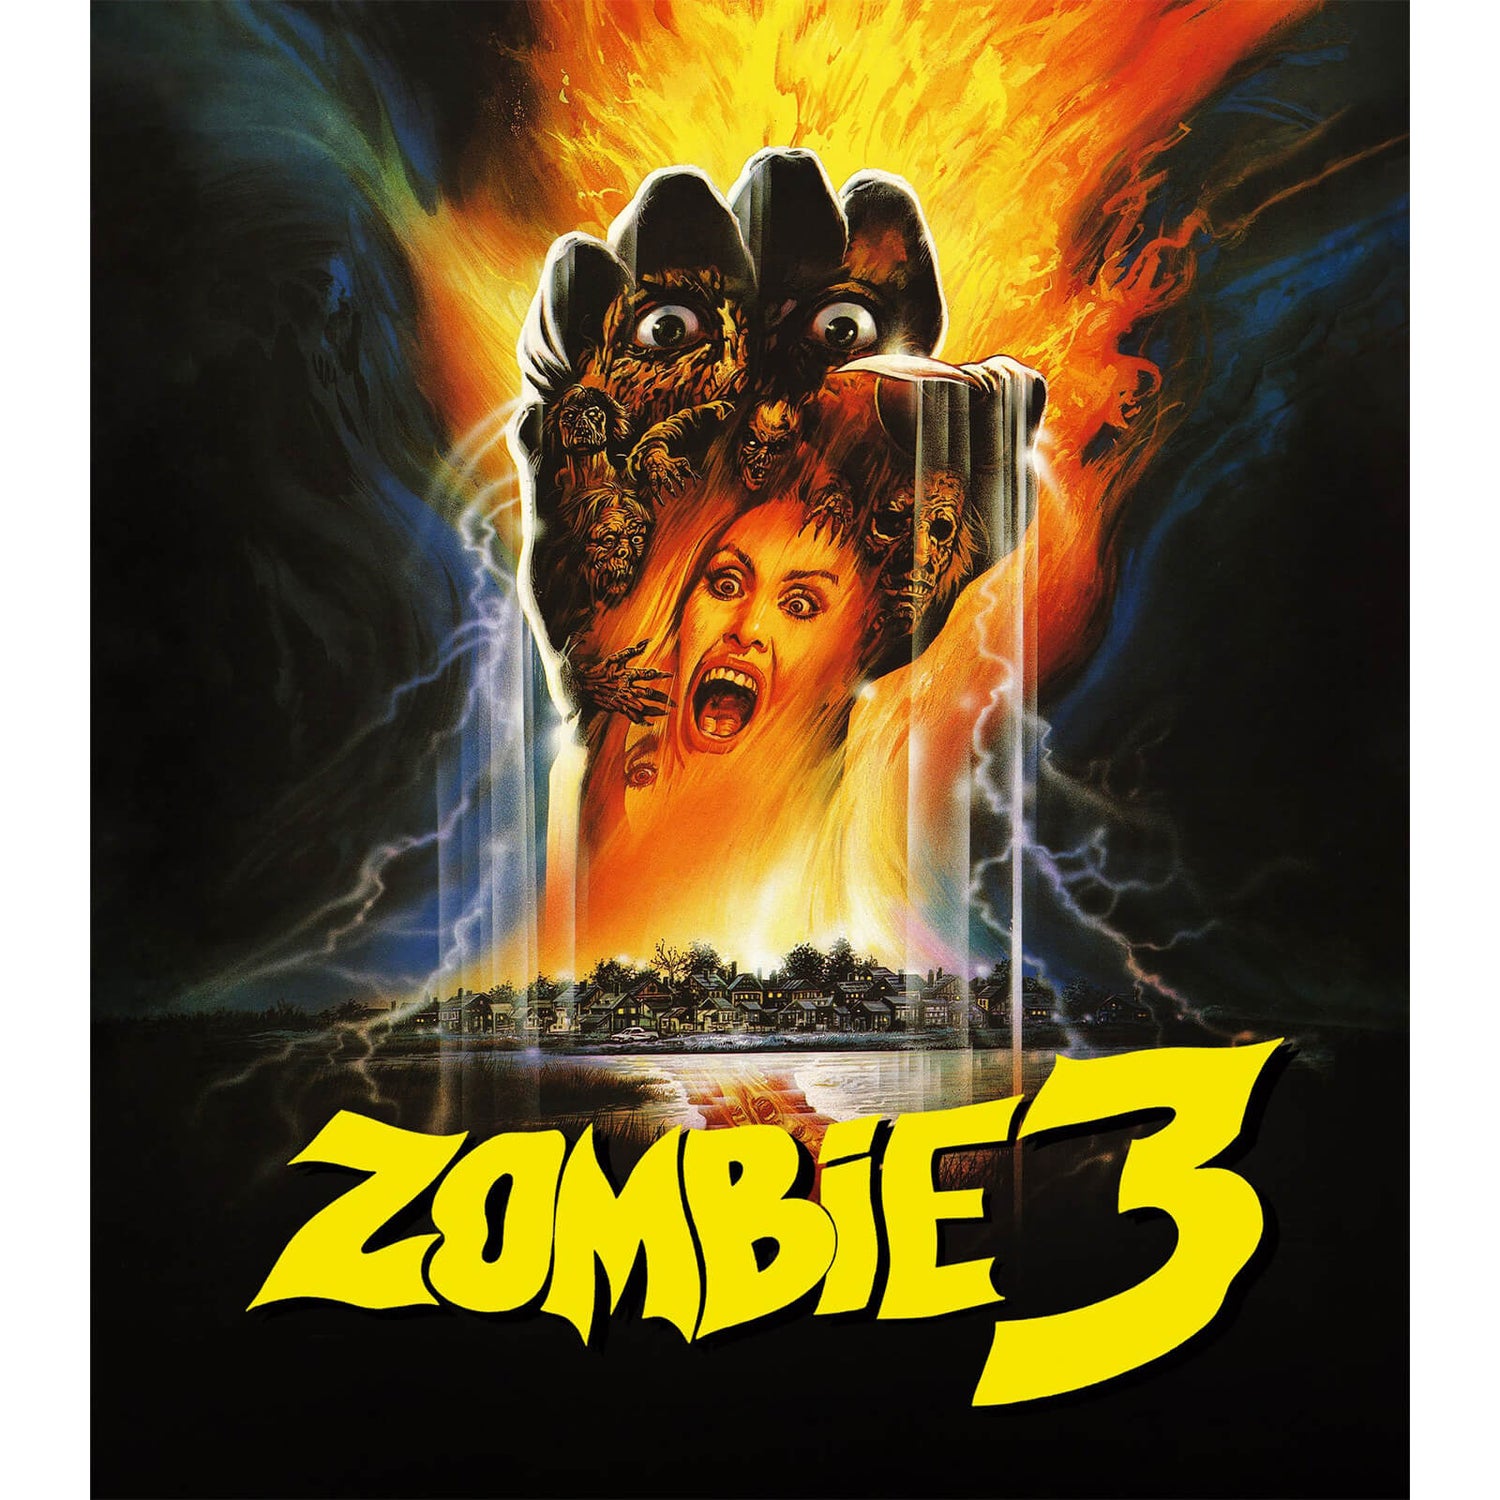 Zombie 3 (Includes CD) (US Import)